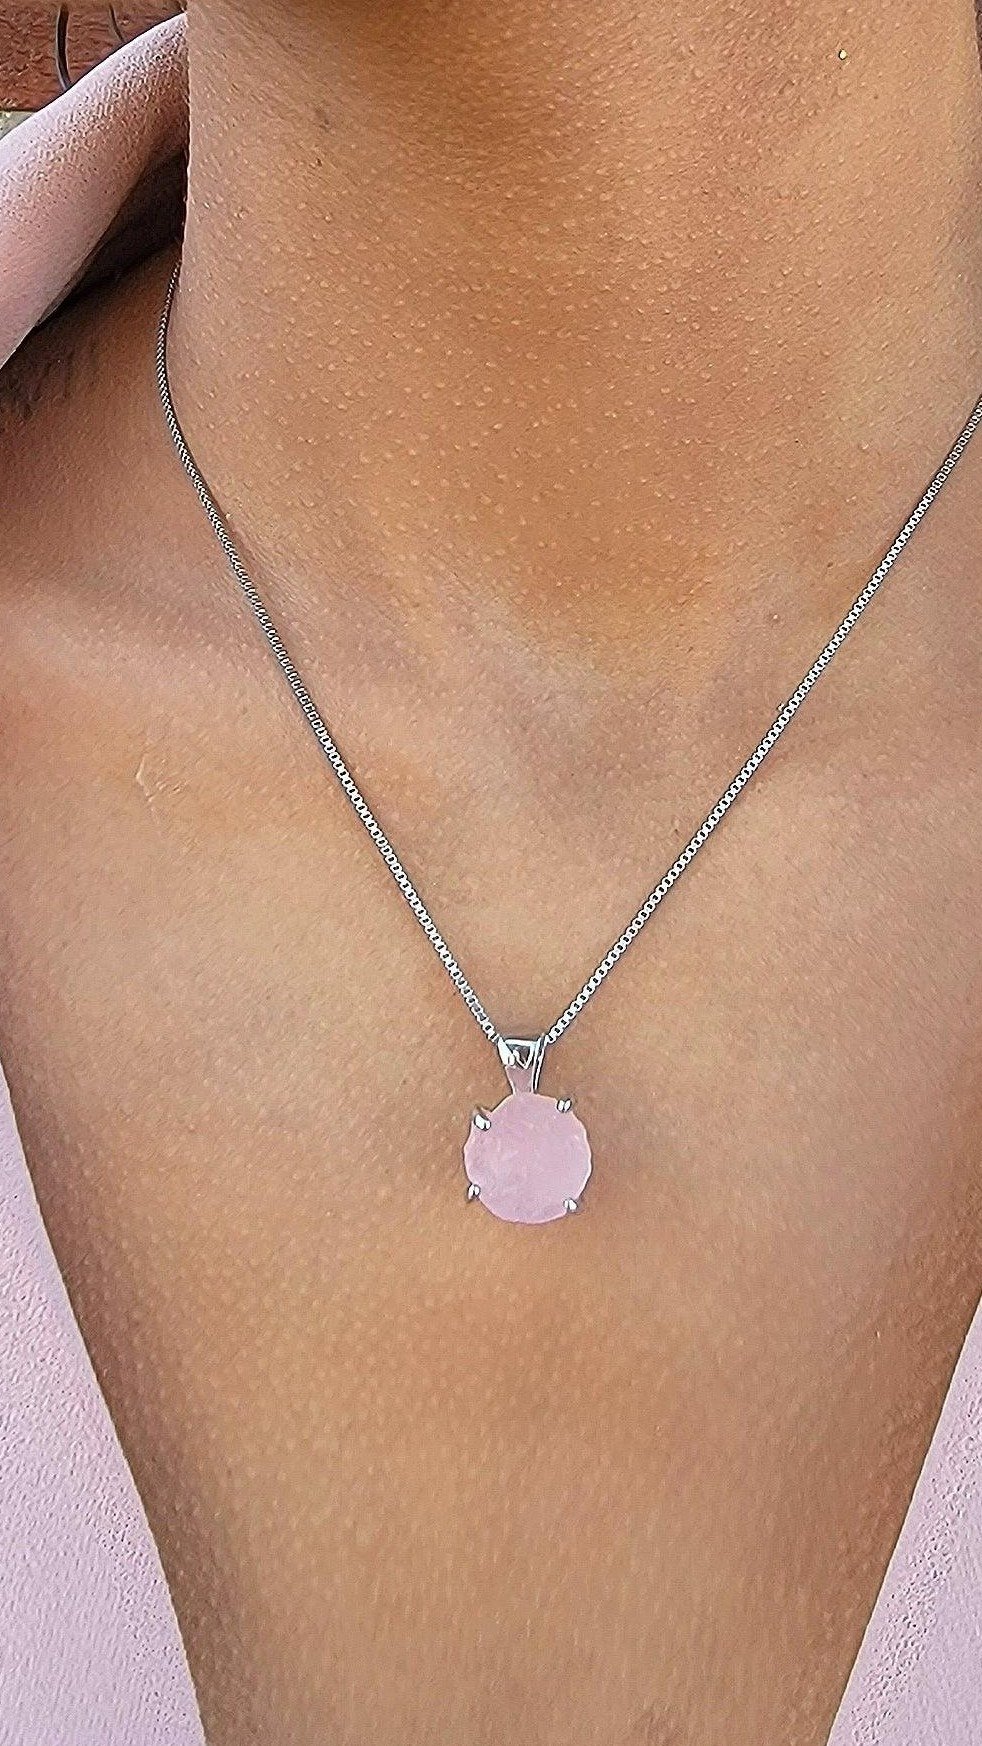 Find Raw Rose Quartz Crystal Pendant Necklaces & Earrings At This Top Jeweler